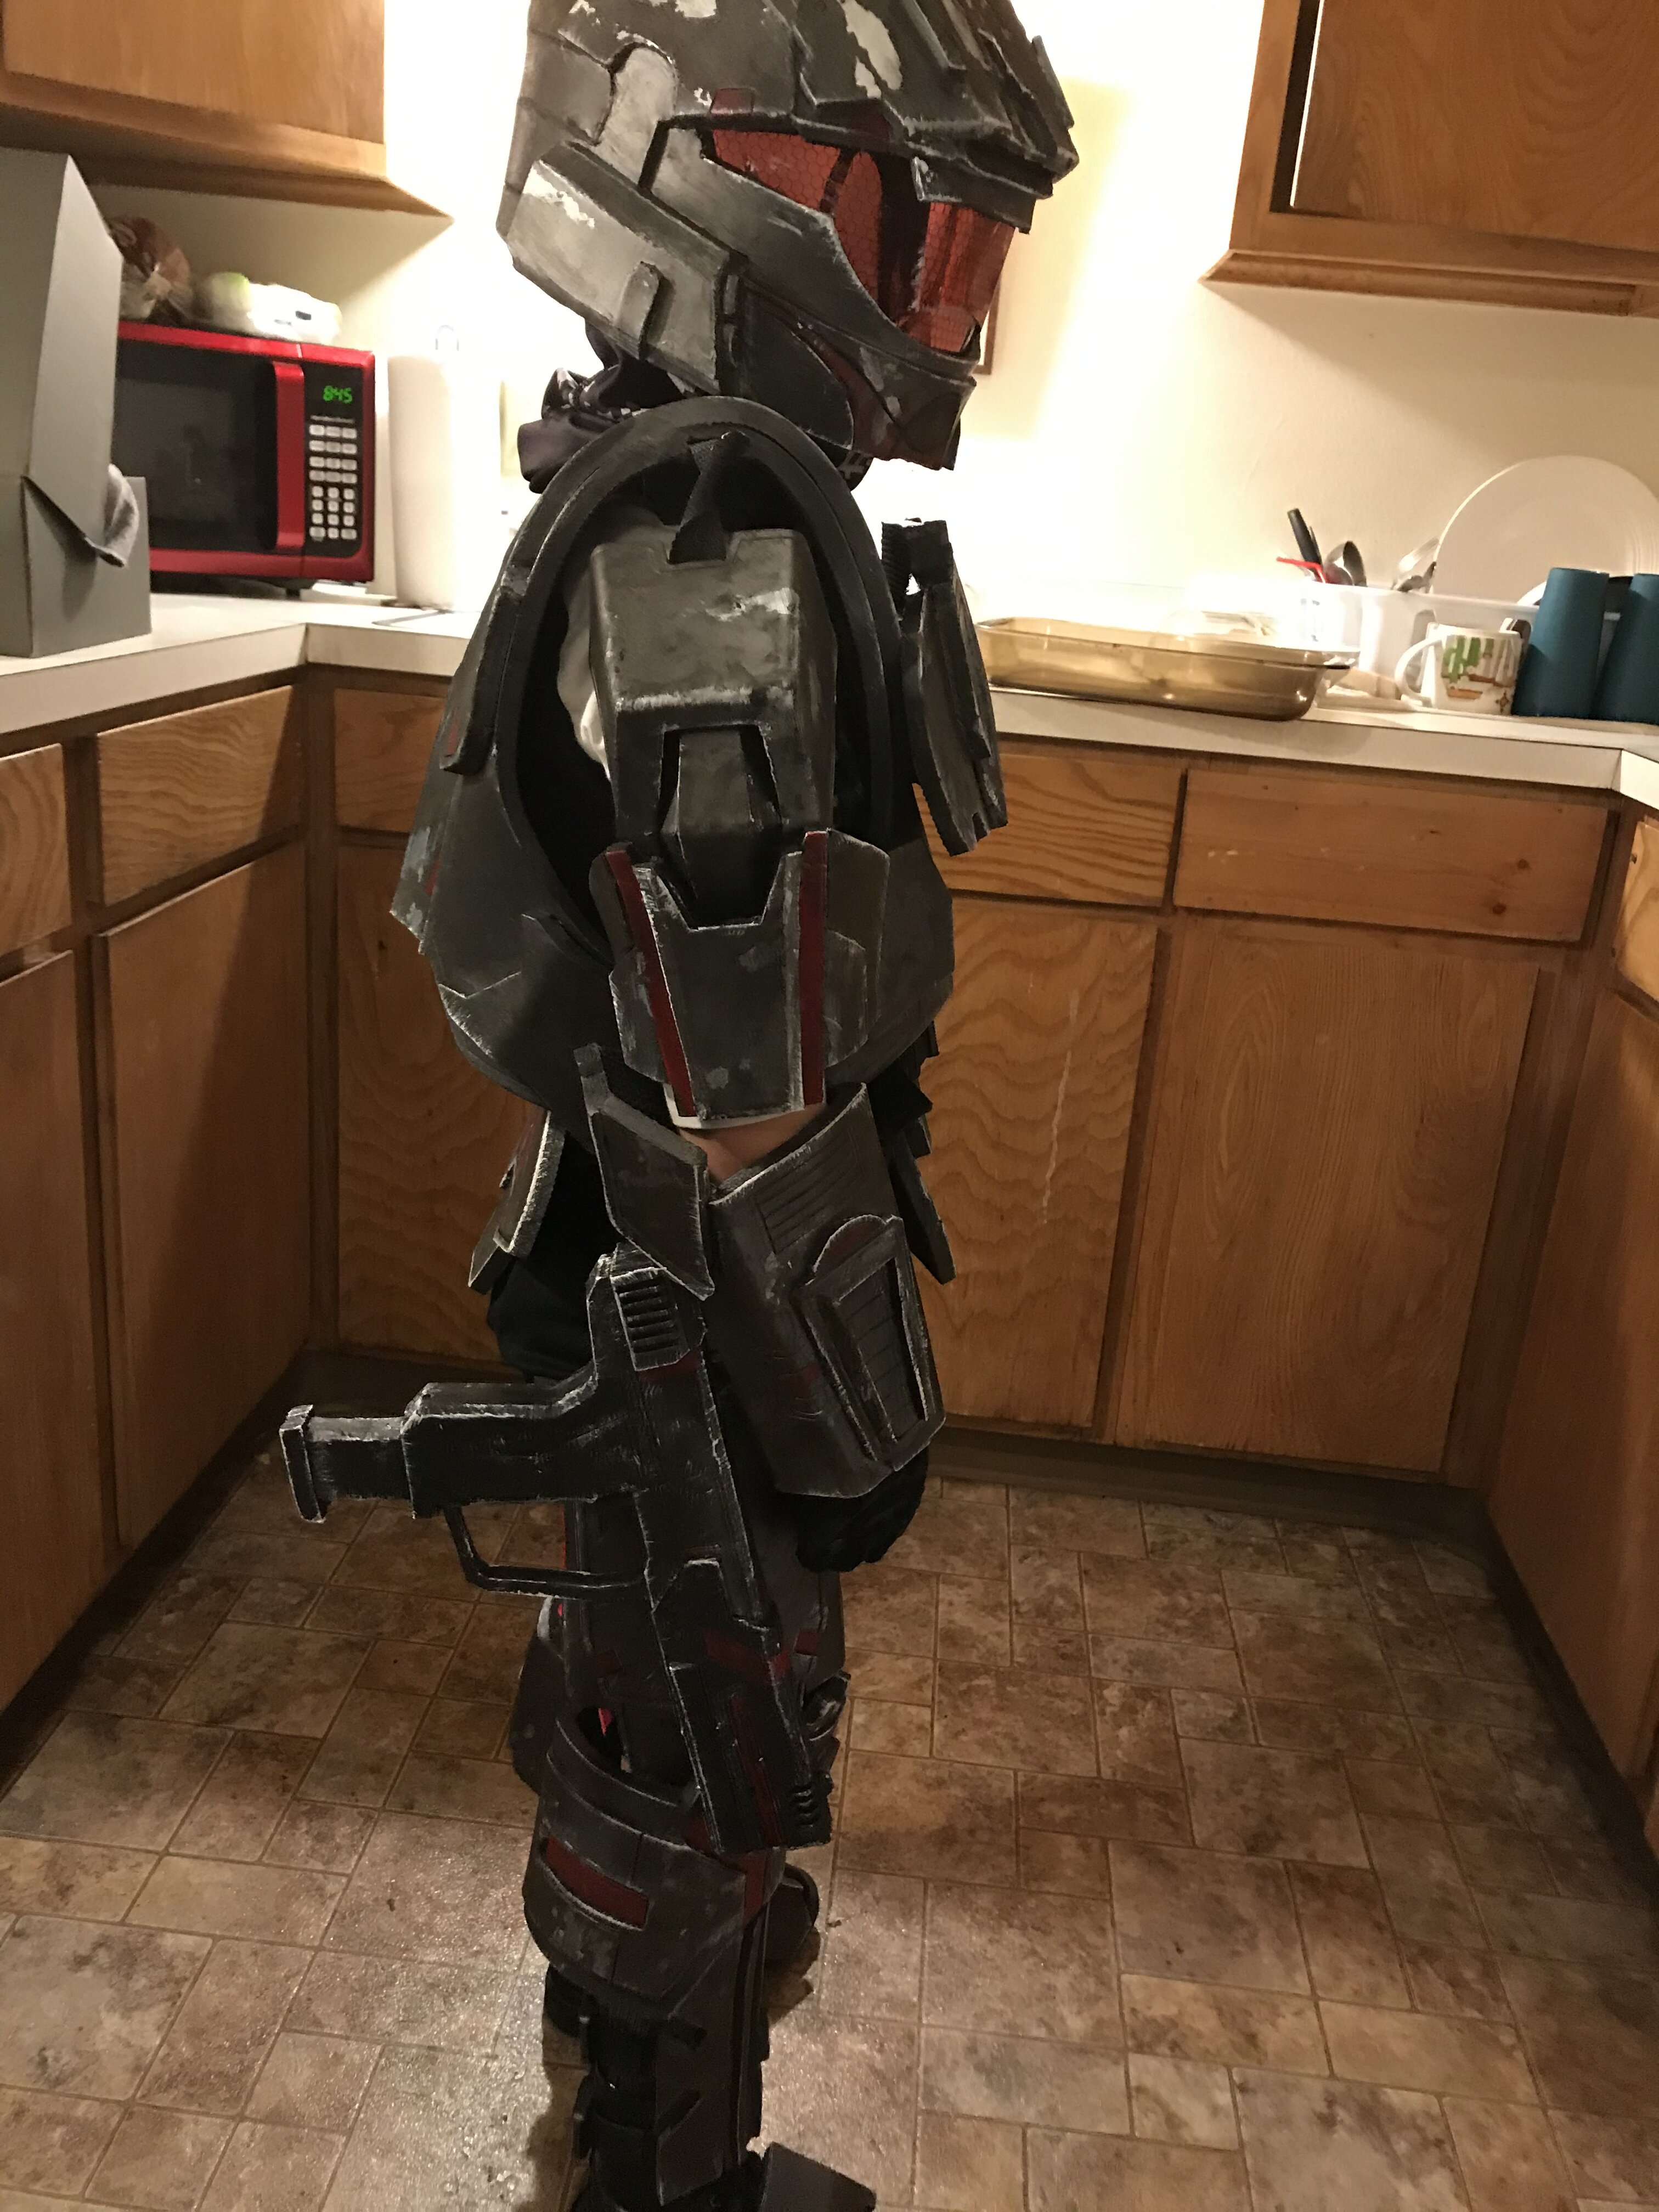 First Build/New to Cosplay: Into Hell | Page 2 | Halo Costume and Prop ...